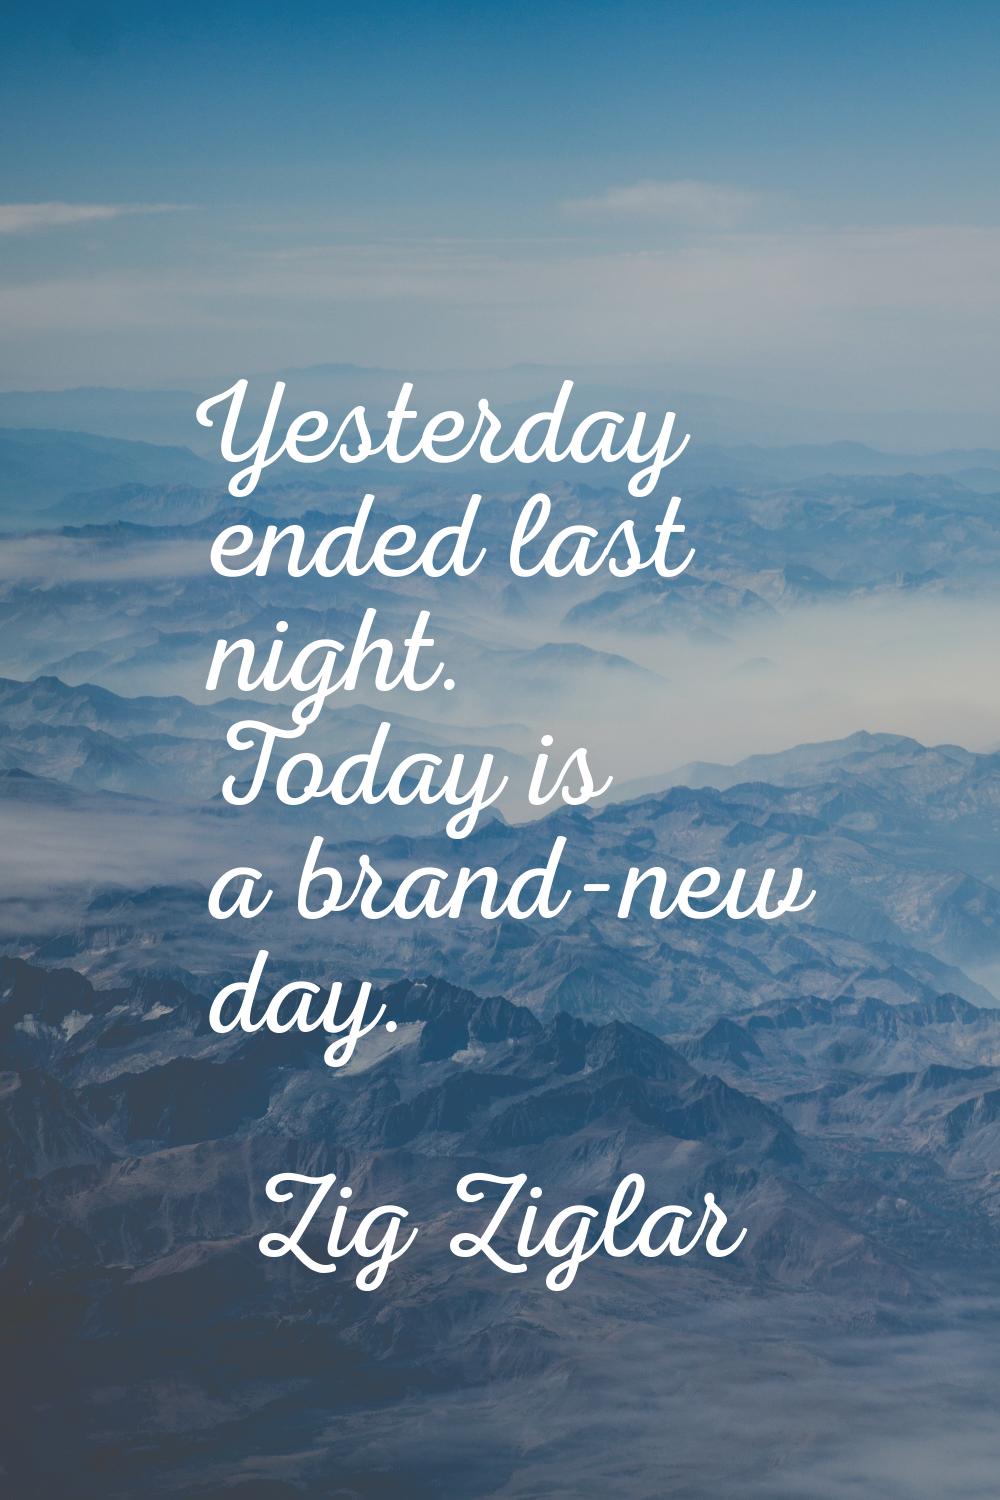 Yesterday ended last night. Today is a brand-new day.